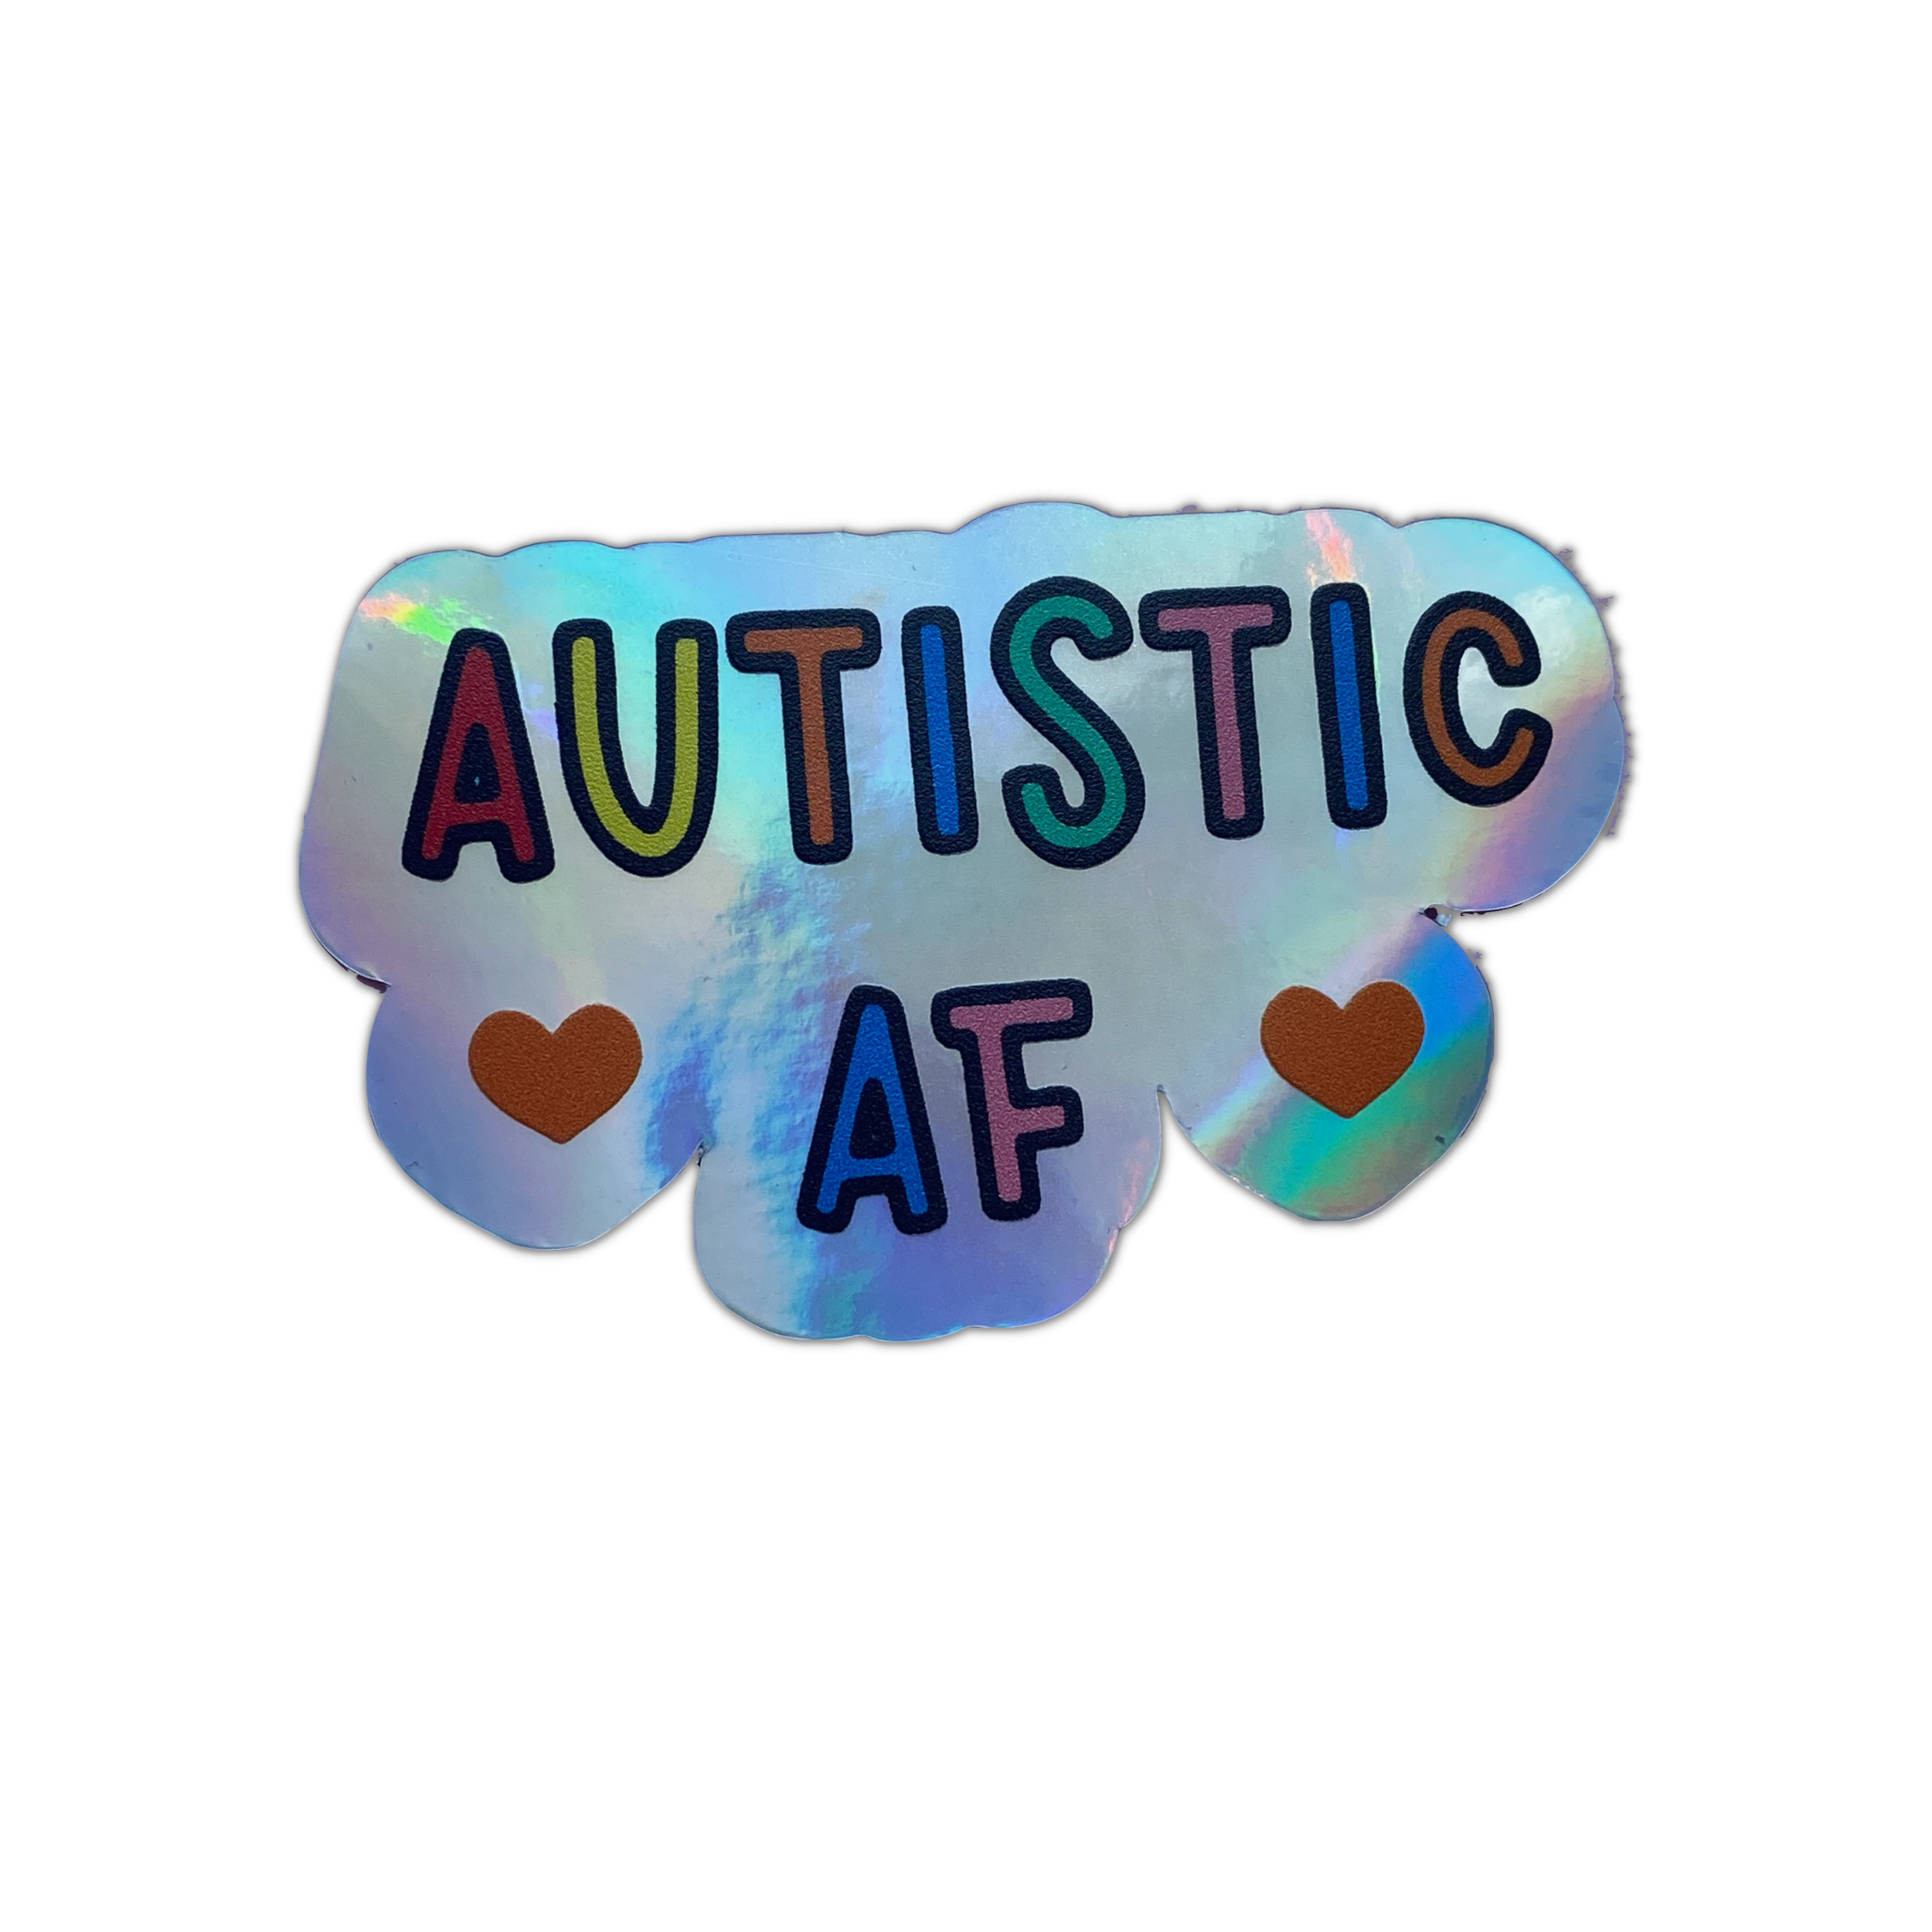 The shiny Autistic AF sticker.